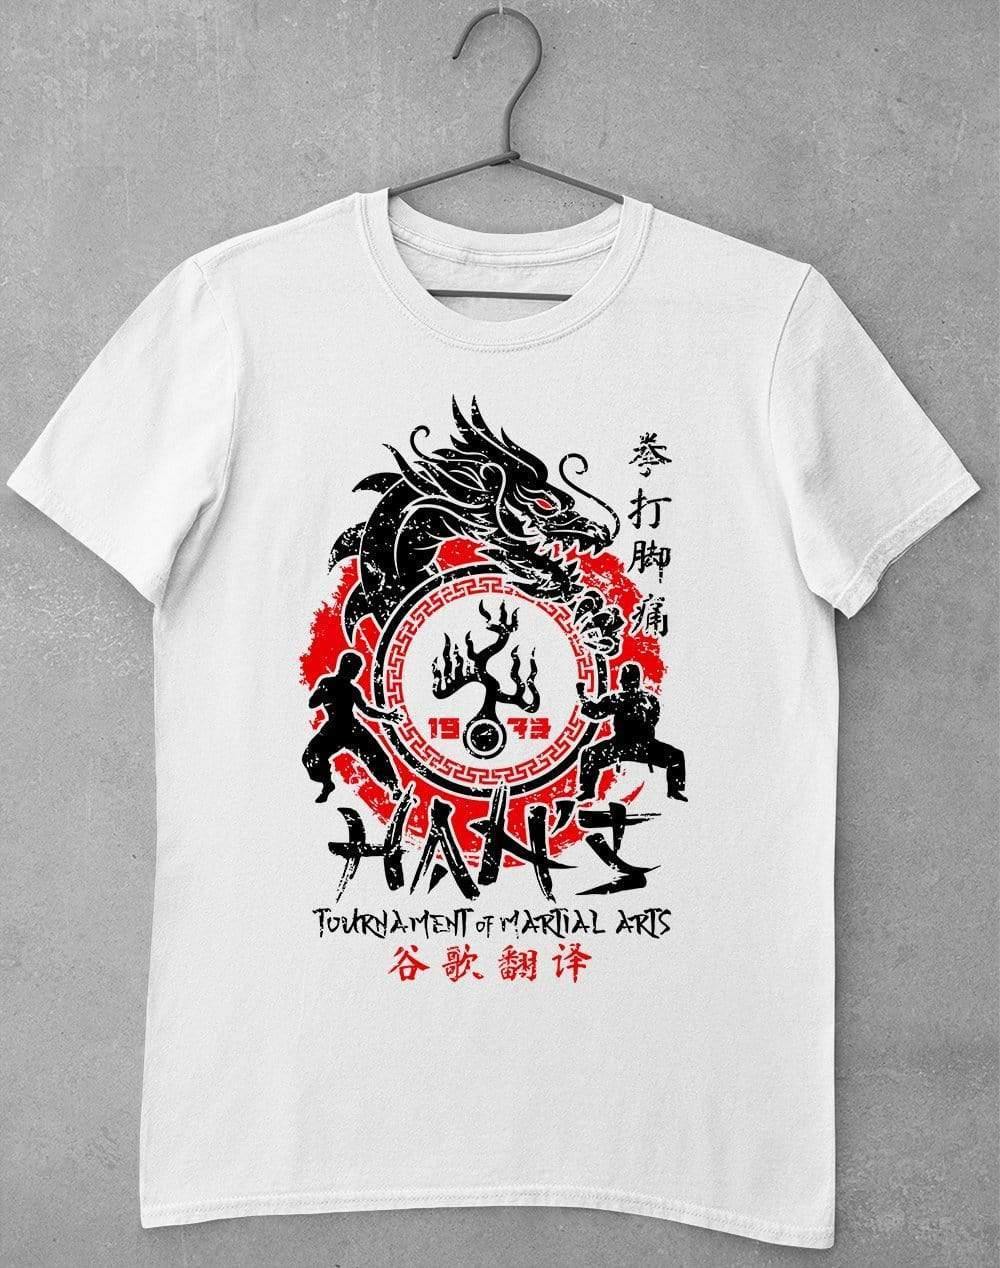 Han's Tournament of Martial Arts T-Shirt S / White  - Off World Tees